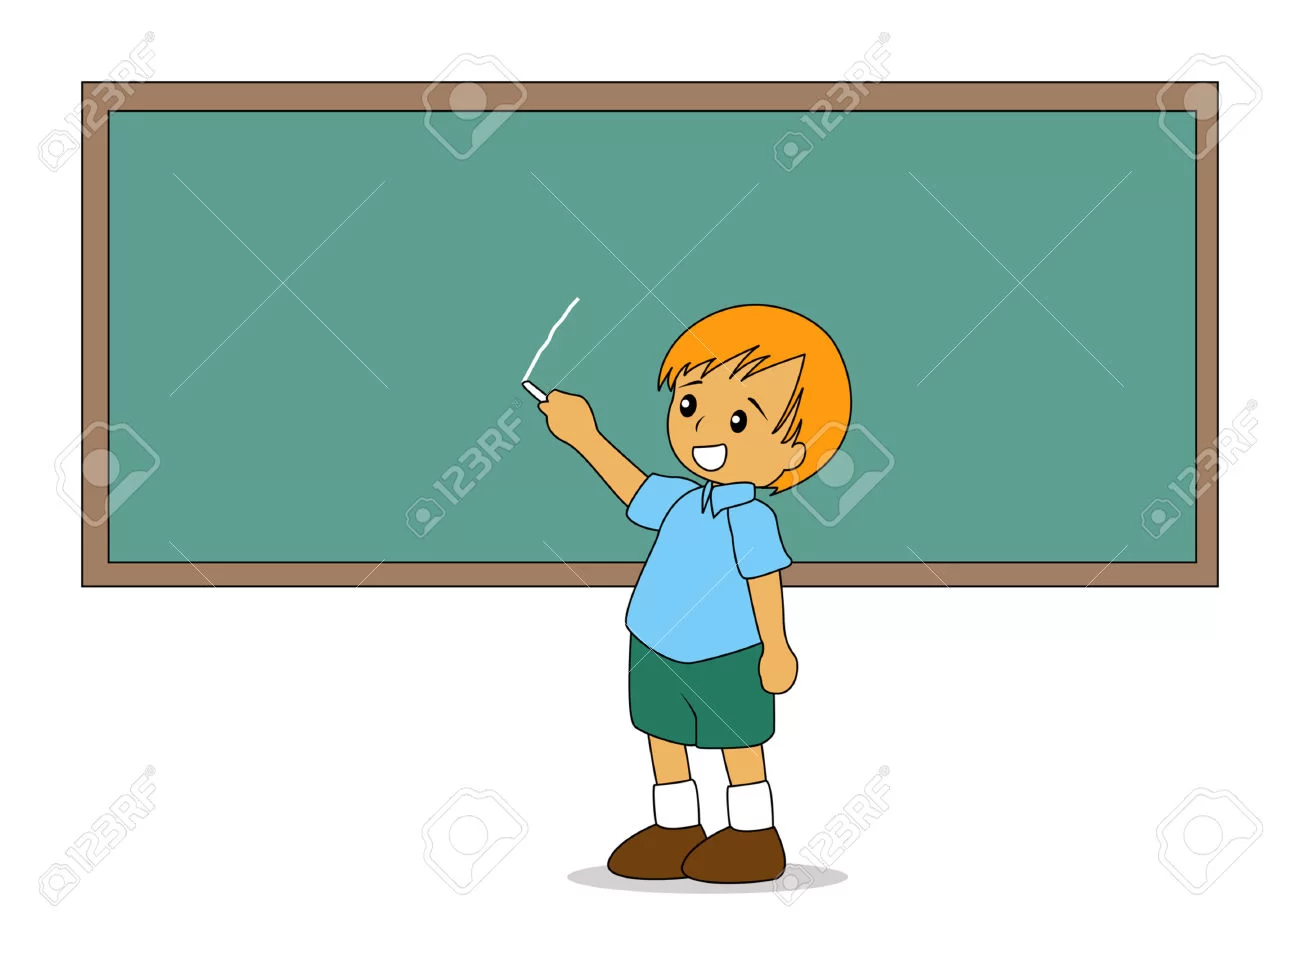 1830406-Illustration-of-a-Kid-writing-on-the-Board-Stock-Vector-board-school